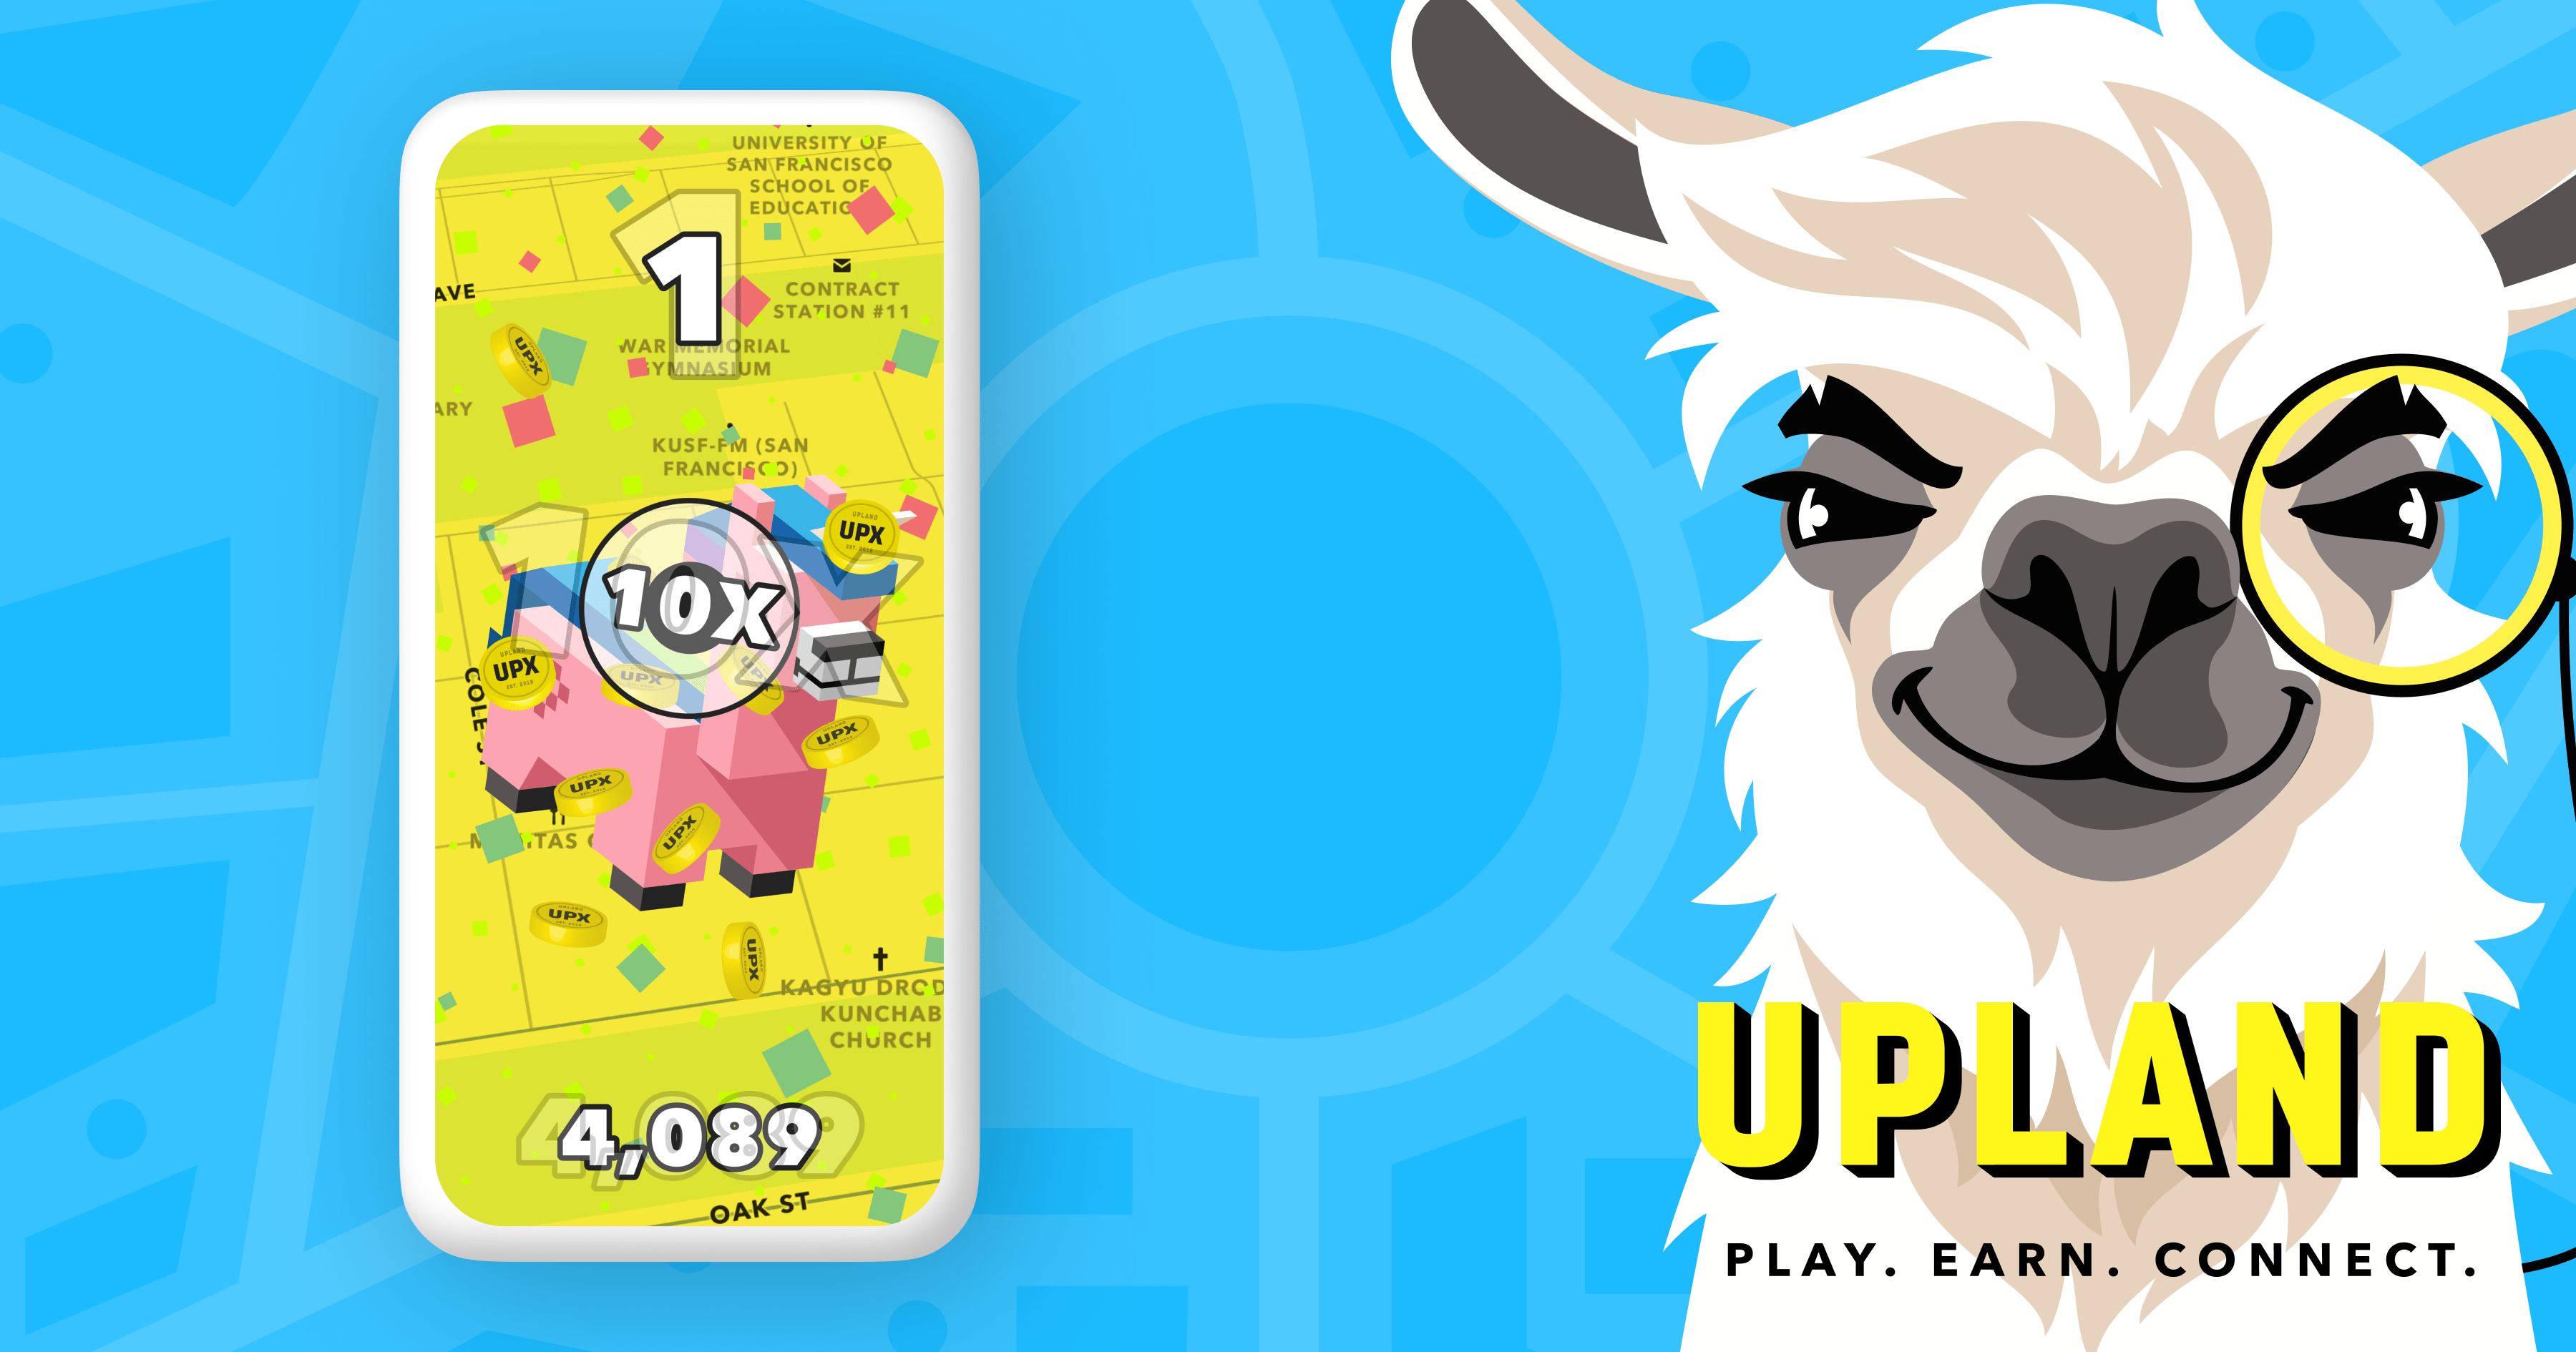 Upland: Play. Earn. Connect. Picture of Llama and app interface